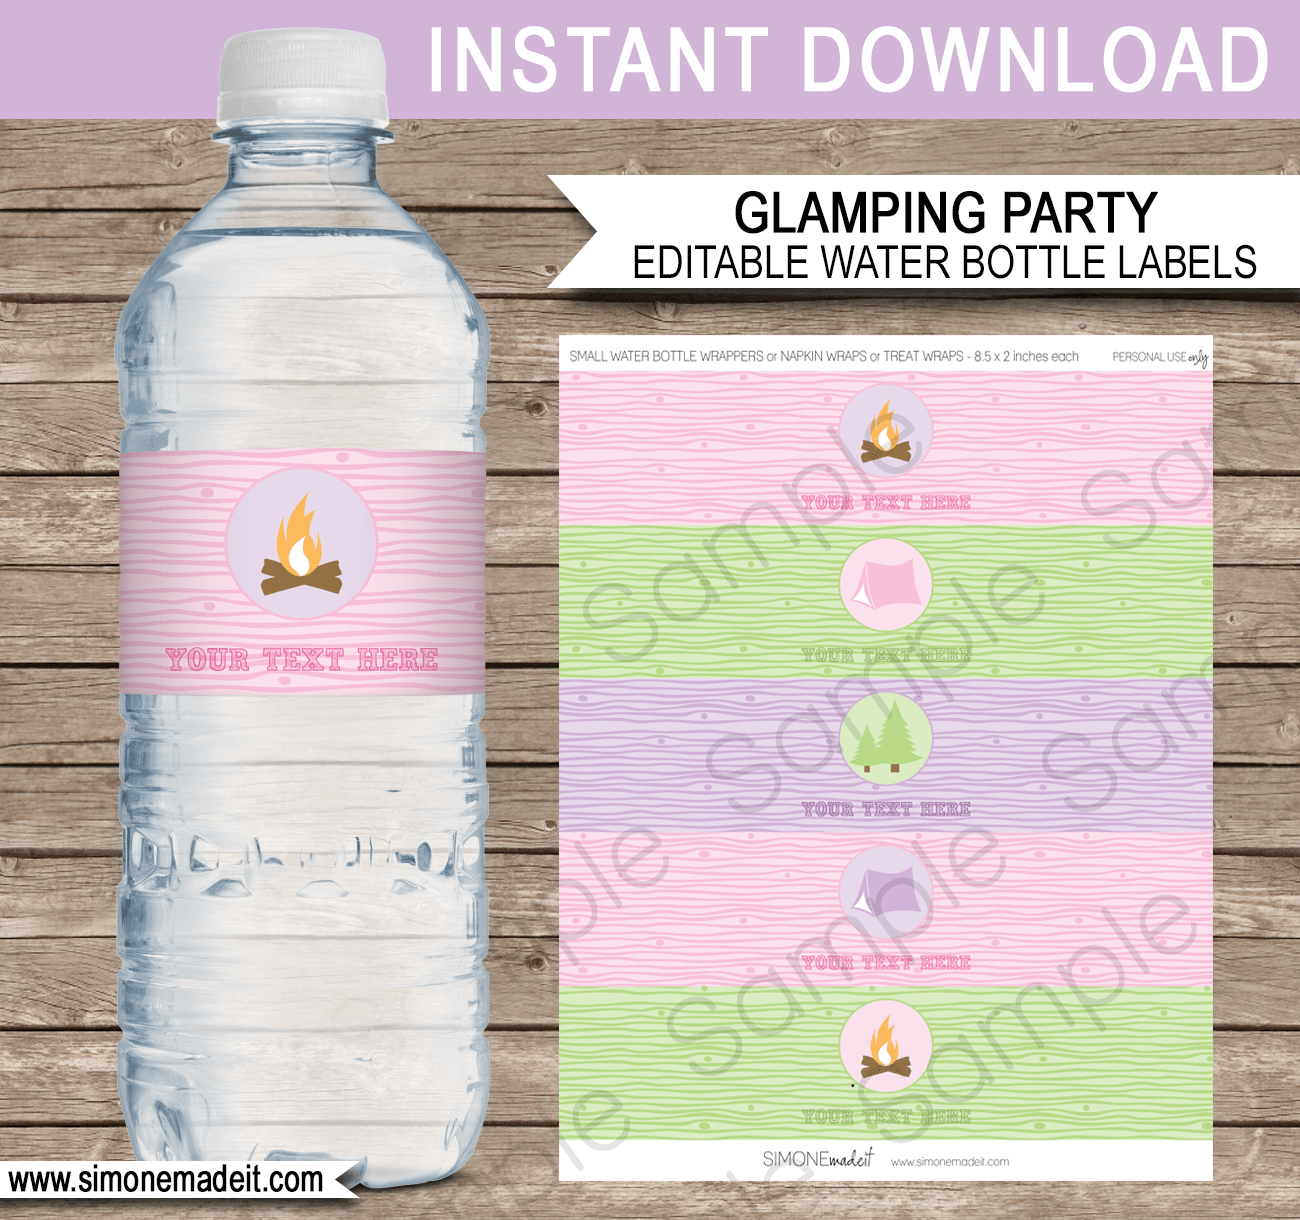 Glamping Party Water Bottle Labels | Birthday Party Printable Decorations | Editable DIY Template | $3.00 INSTANT DOWNLOAD via SIMONEmadeit.com